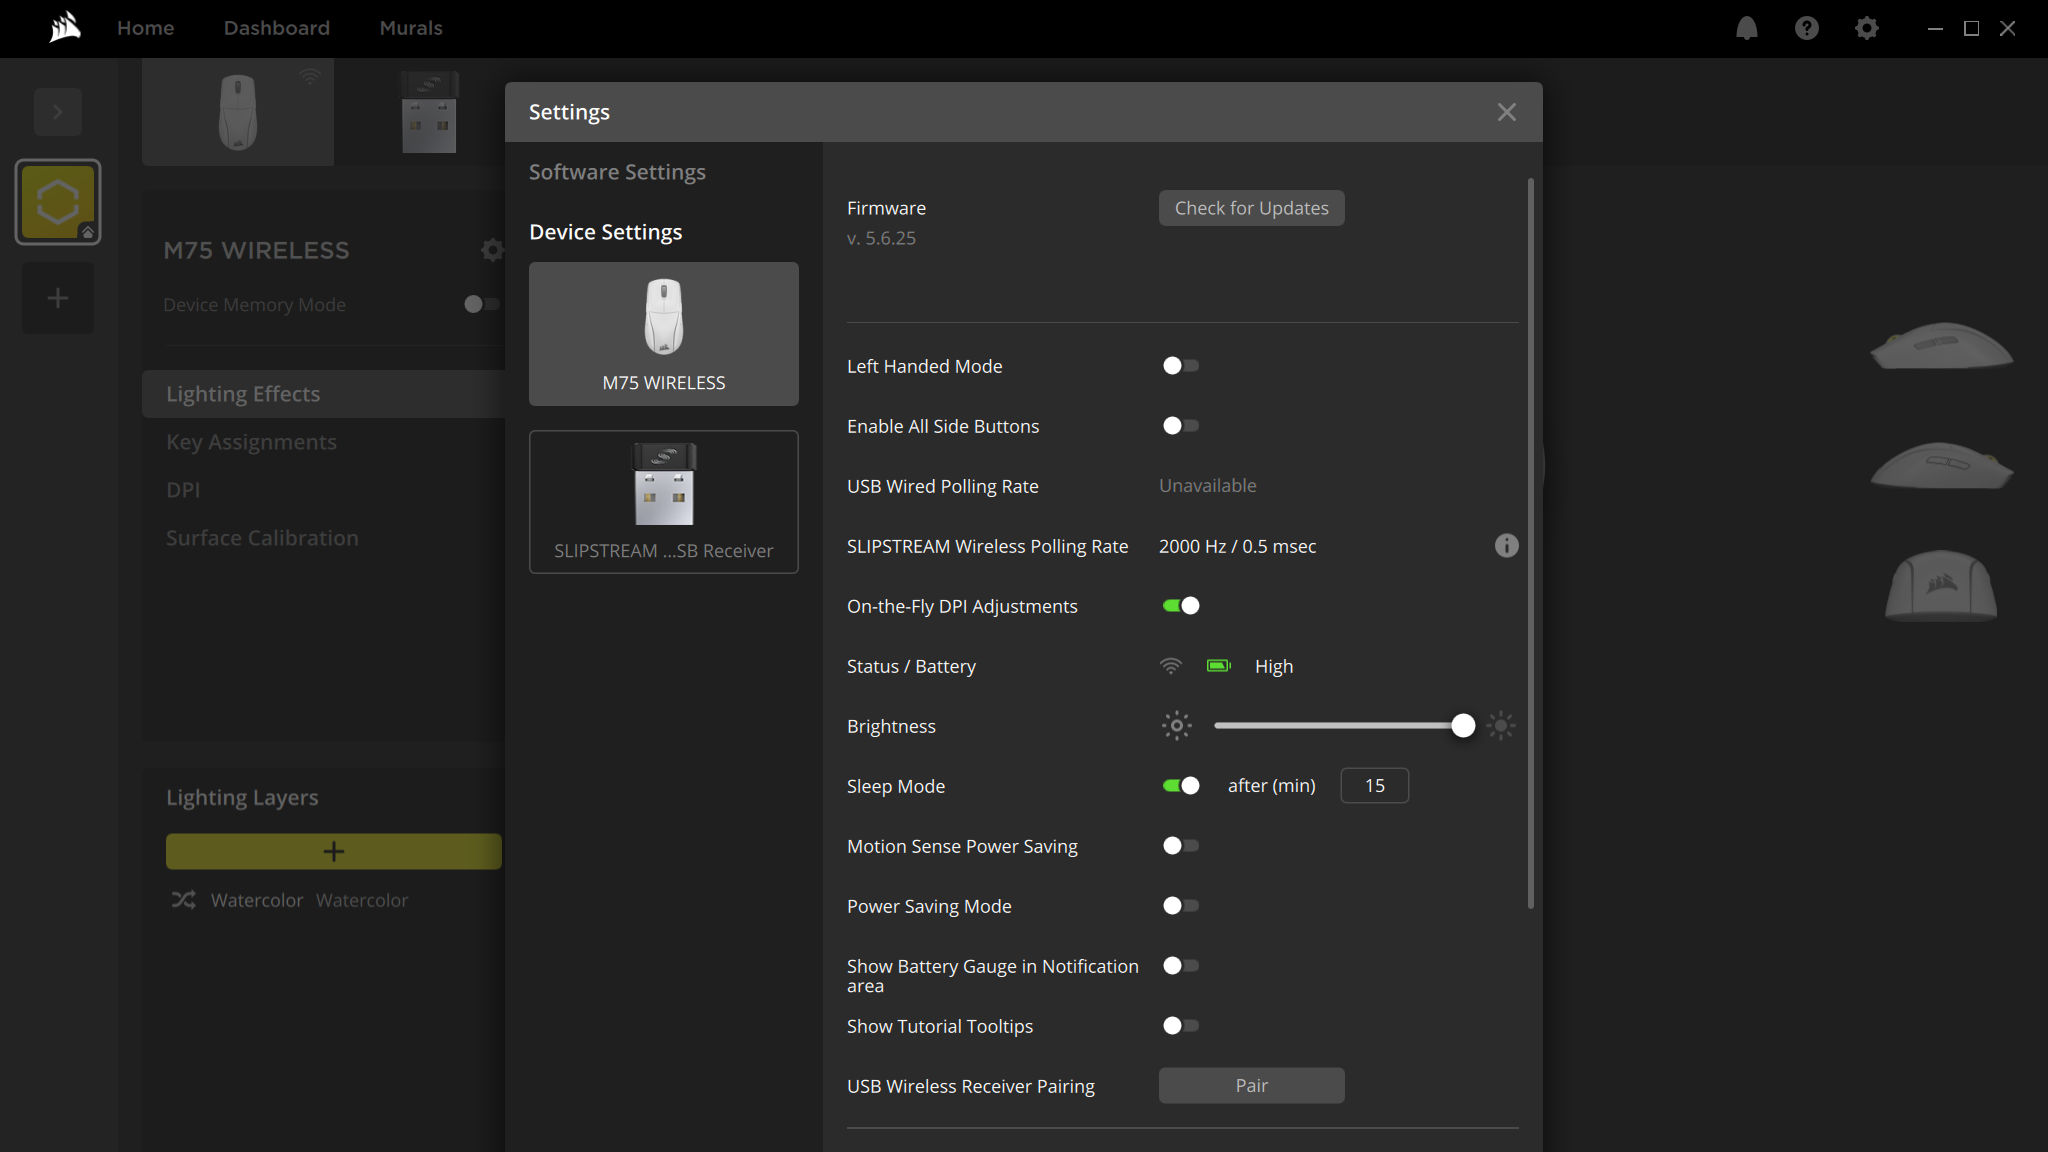 Screenshots of Corsair's iCUE application, showing the software controls for the Corsair M75 Wireless gaming mouse